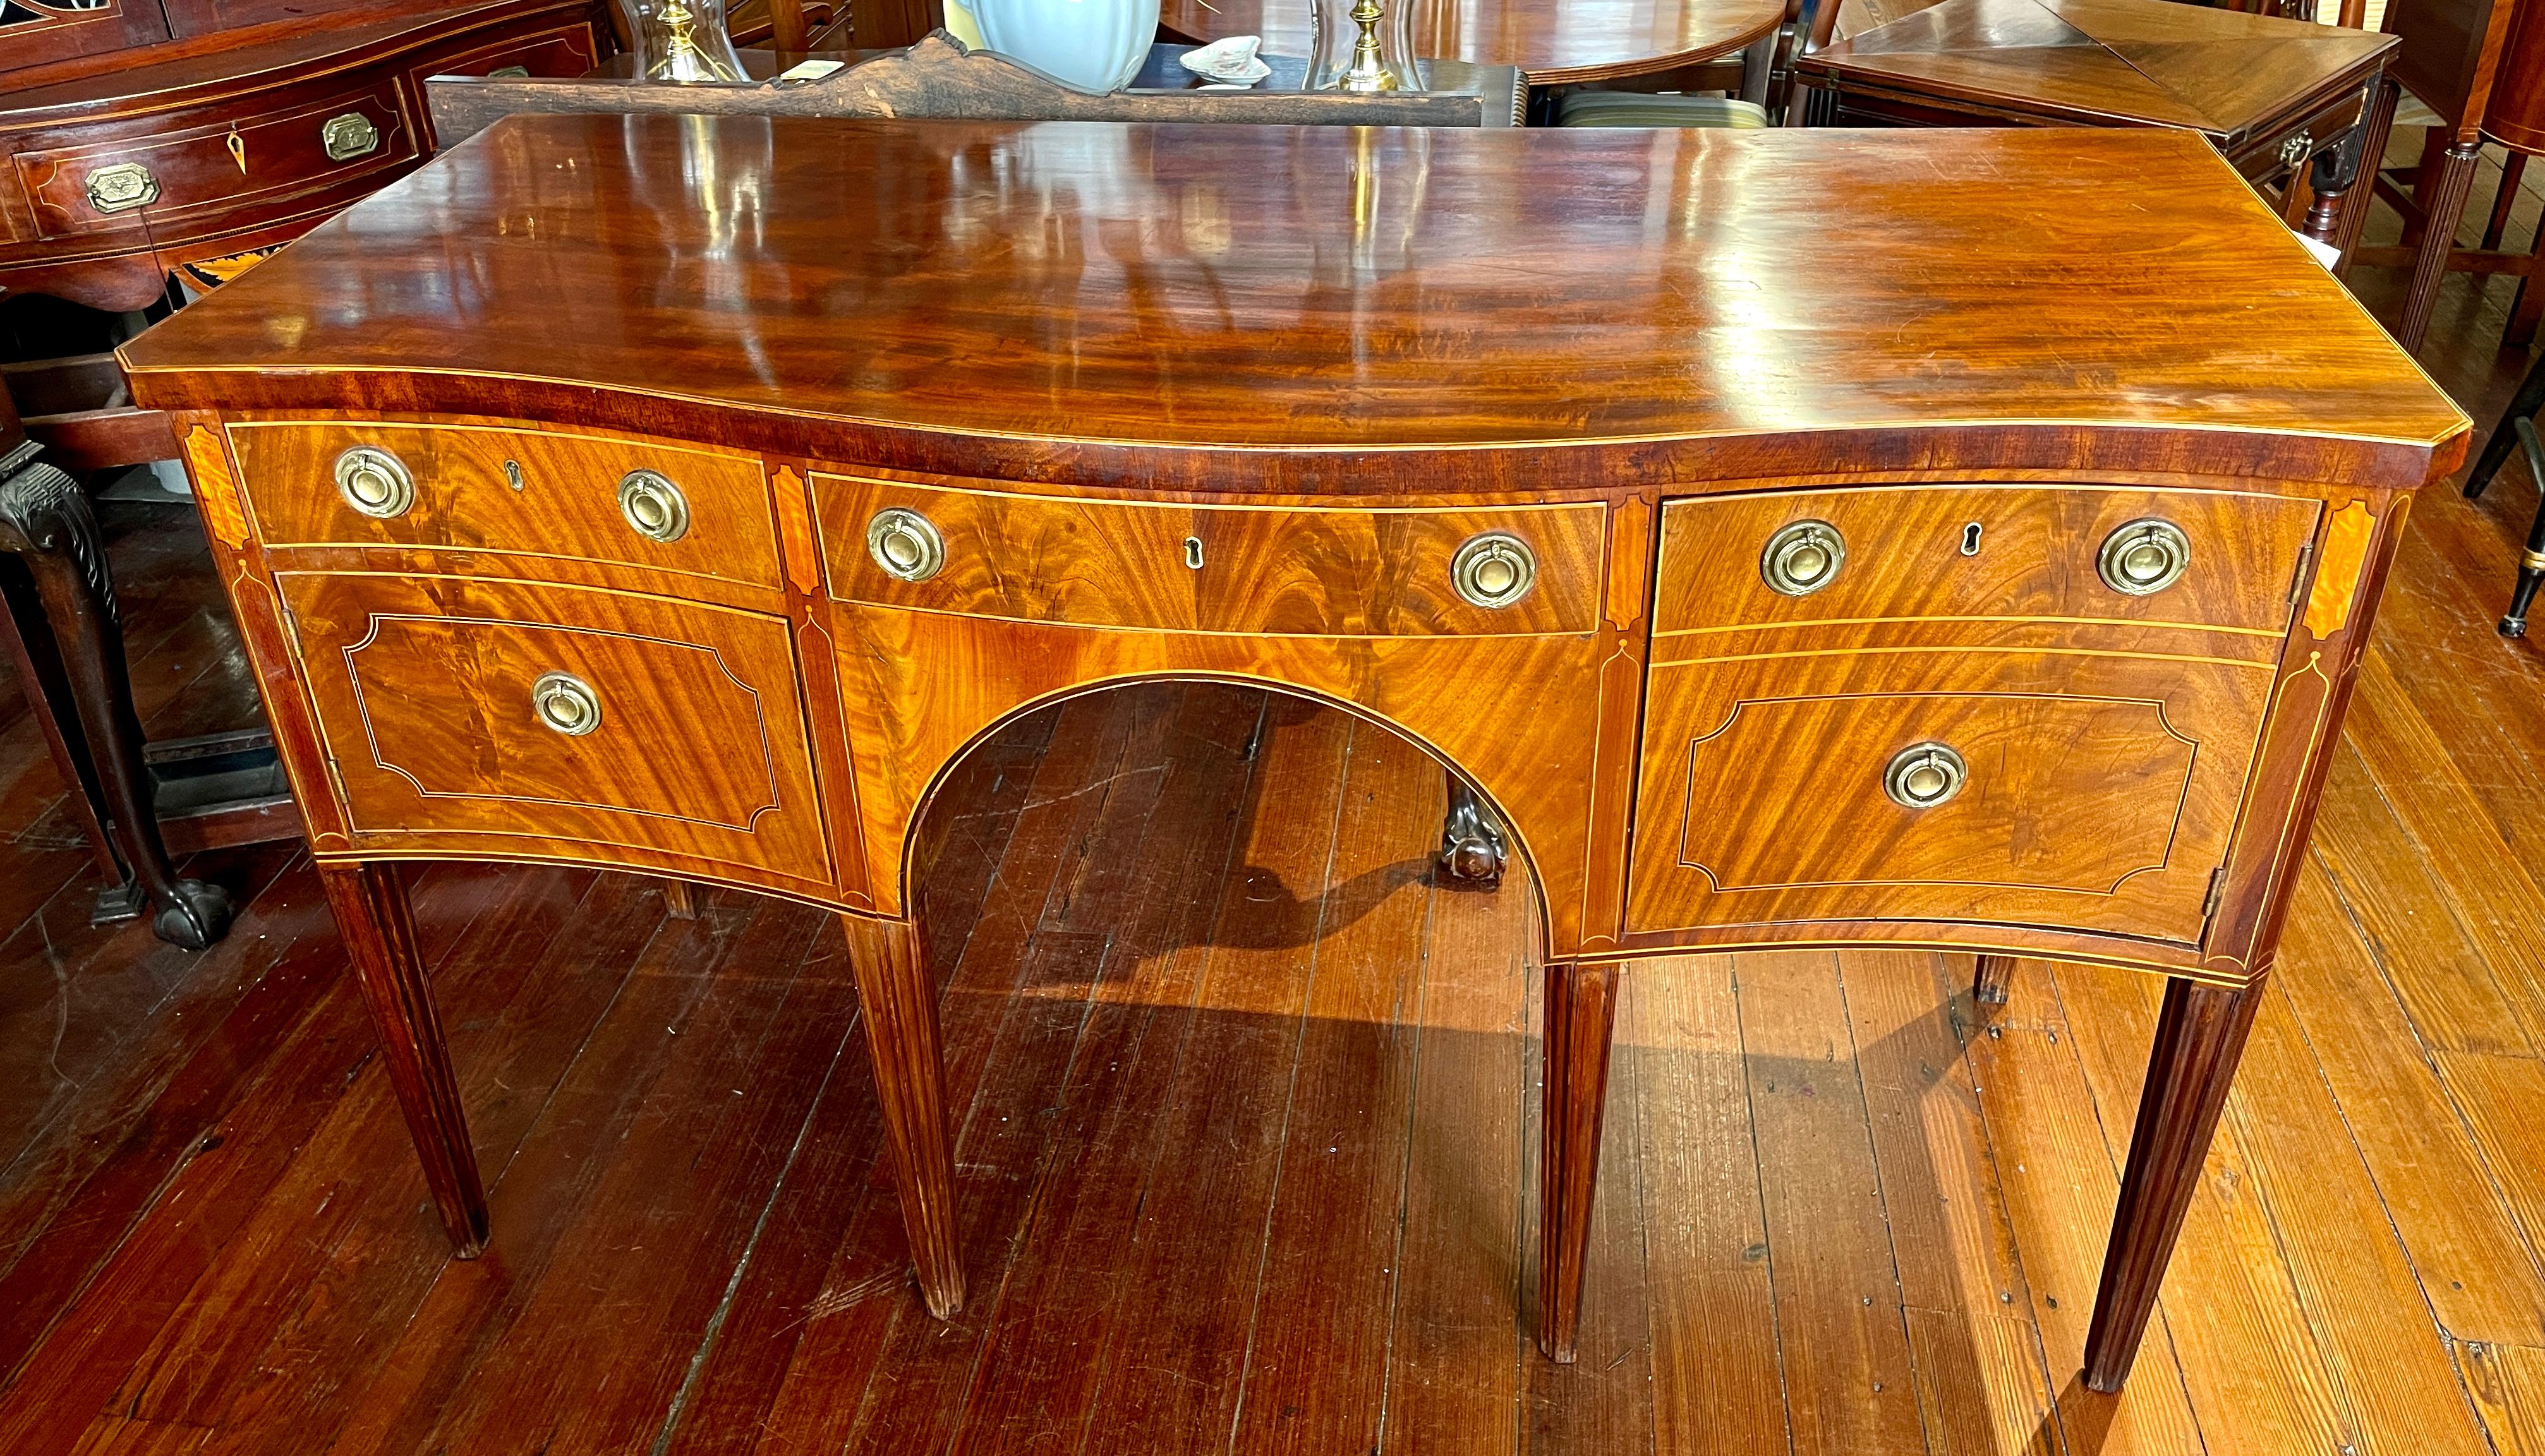 Extraordinarily Fine Antique English PERIOD Geo. III Inlaid bookmatched flame or crotch mahogany Hepplewhite style serpentine Sideboard with exceptional satinwood and boxwood inlays throughout (see images).  The brasses are antique.  There appears